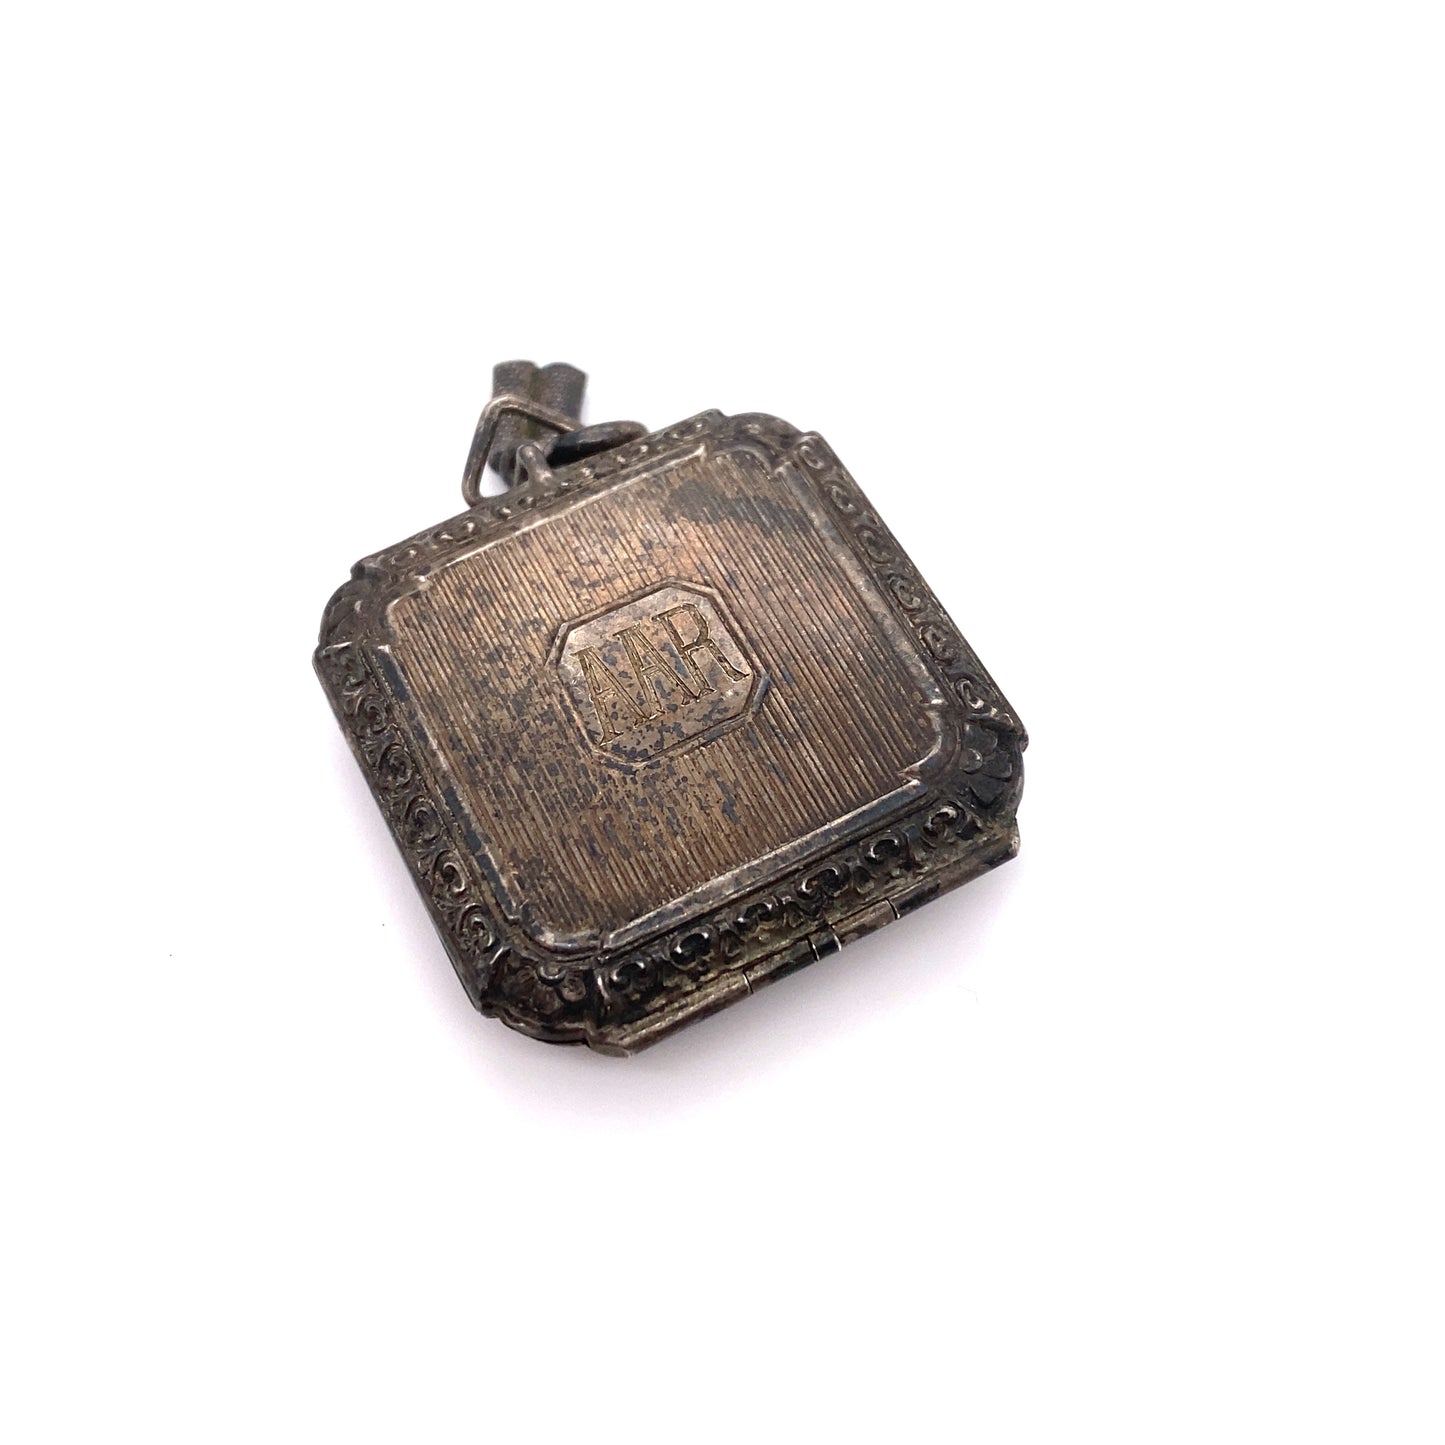 Circa 1925 Monogrammed Mourning Locket with Hair and Photo in Sterling Silver and 18K Gold